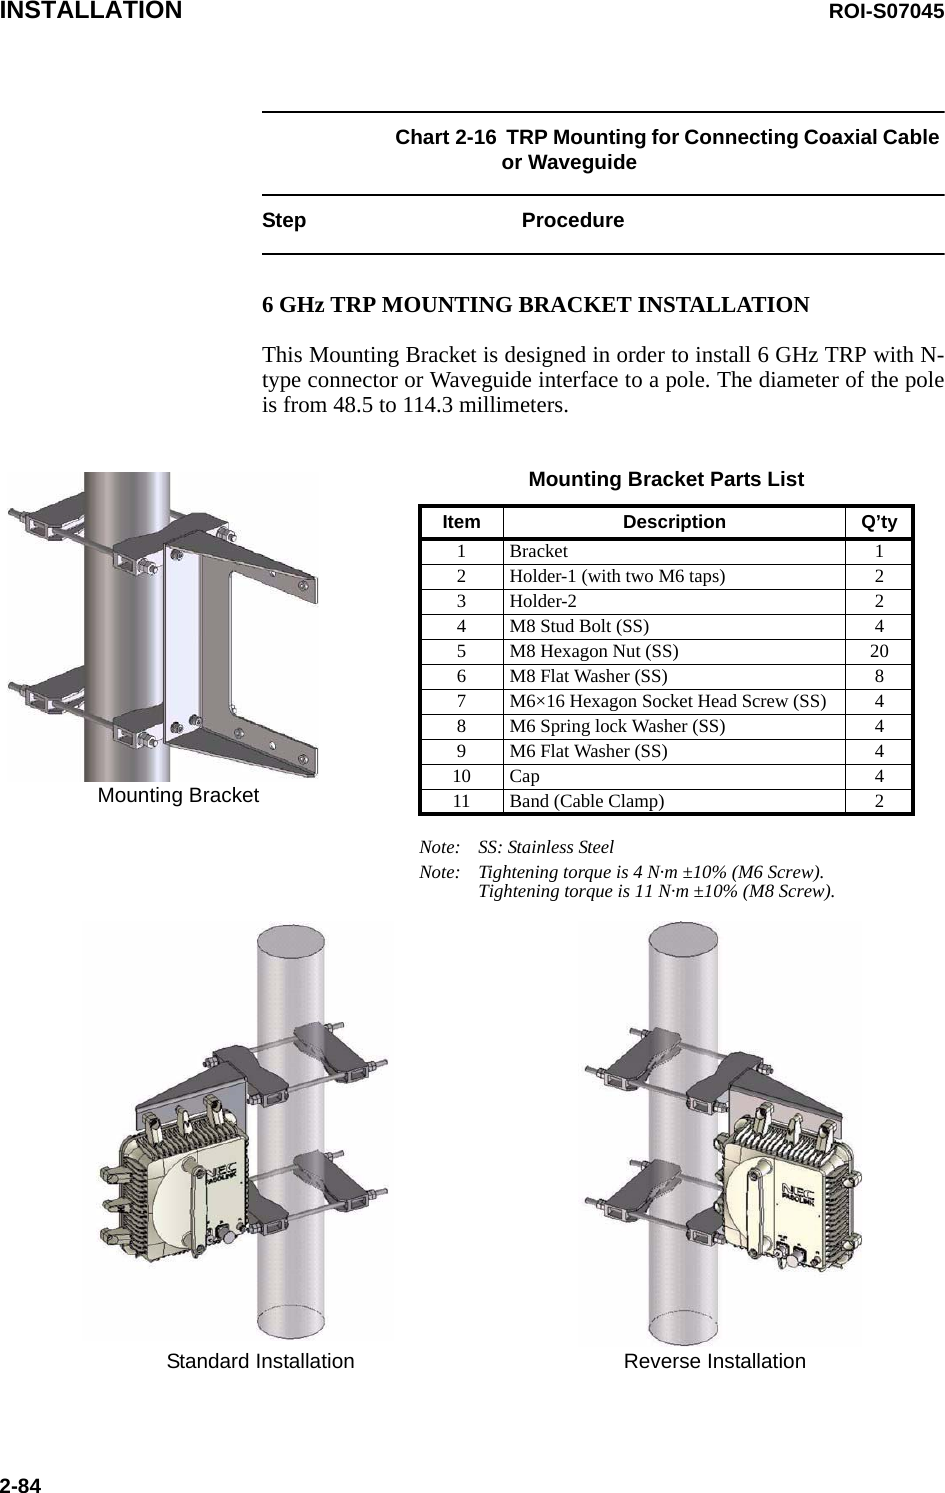 INSTALLATION ROI-S070452-84Chart 2-16  TRP Mounting for Connecting Coaxial Cable or WaveguideStep Procedure6 GHz TRP MOUNTING BRACKET INSTALLATIONThis Mounting Bracket is designed in order to install 6 GHz TRP with N-type connector or Waveguide interface to a pole. The diameter of the poleis from 48.5 to 114.3 millimeters.Note: SS: Stainless SteelNote: Tightening torque is 4 N·m ±10% (M6 Screw).Tightening torque is 11 N·m ±10% (M8 Screw).Mounting Bracket Parts ListItem Description Q’ty1Bracket 12 Holder-1 (with two M6 taps) 23 Holder-2 24 M8 Stud Bolt (SS) 45 M8 Hexagon Nut (SS) 206 M8 Flat Washer (SS) 87 M6×16 Hexagon Socket Head Screw (SS) 48 M6 Spring lock Washer (SS) 49 M6 Flat Washer (SS) 410 Cap 411 Band (Cable Clamp) 2Mounting BracketStandard Installation Reverse Installation